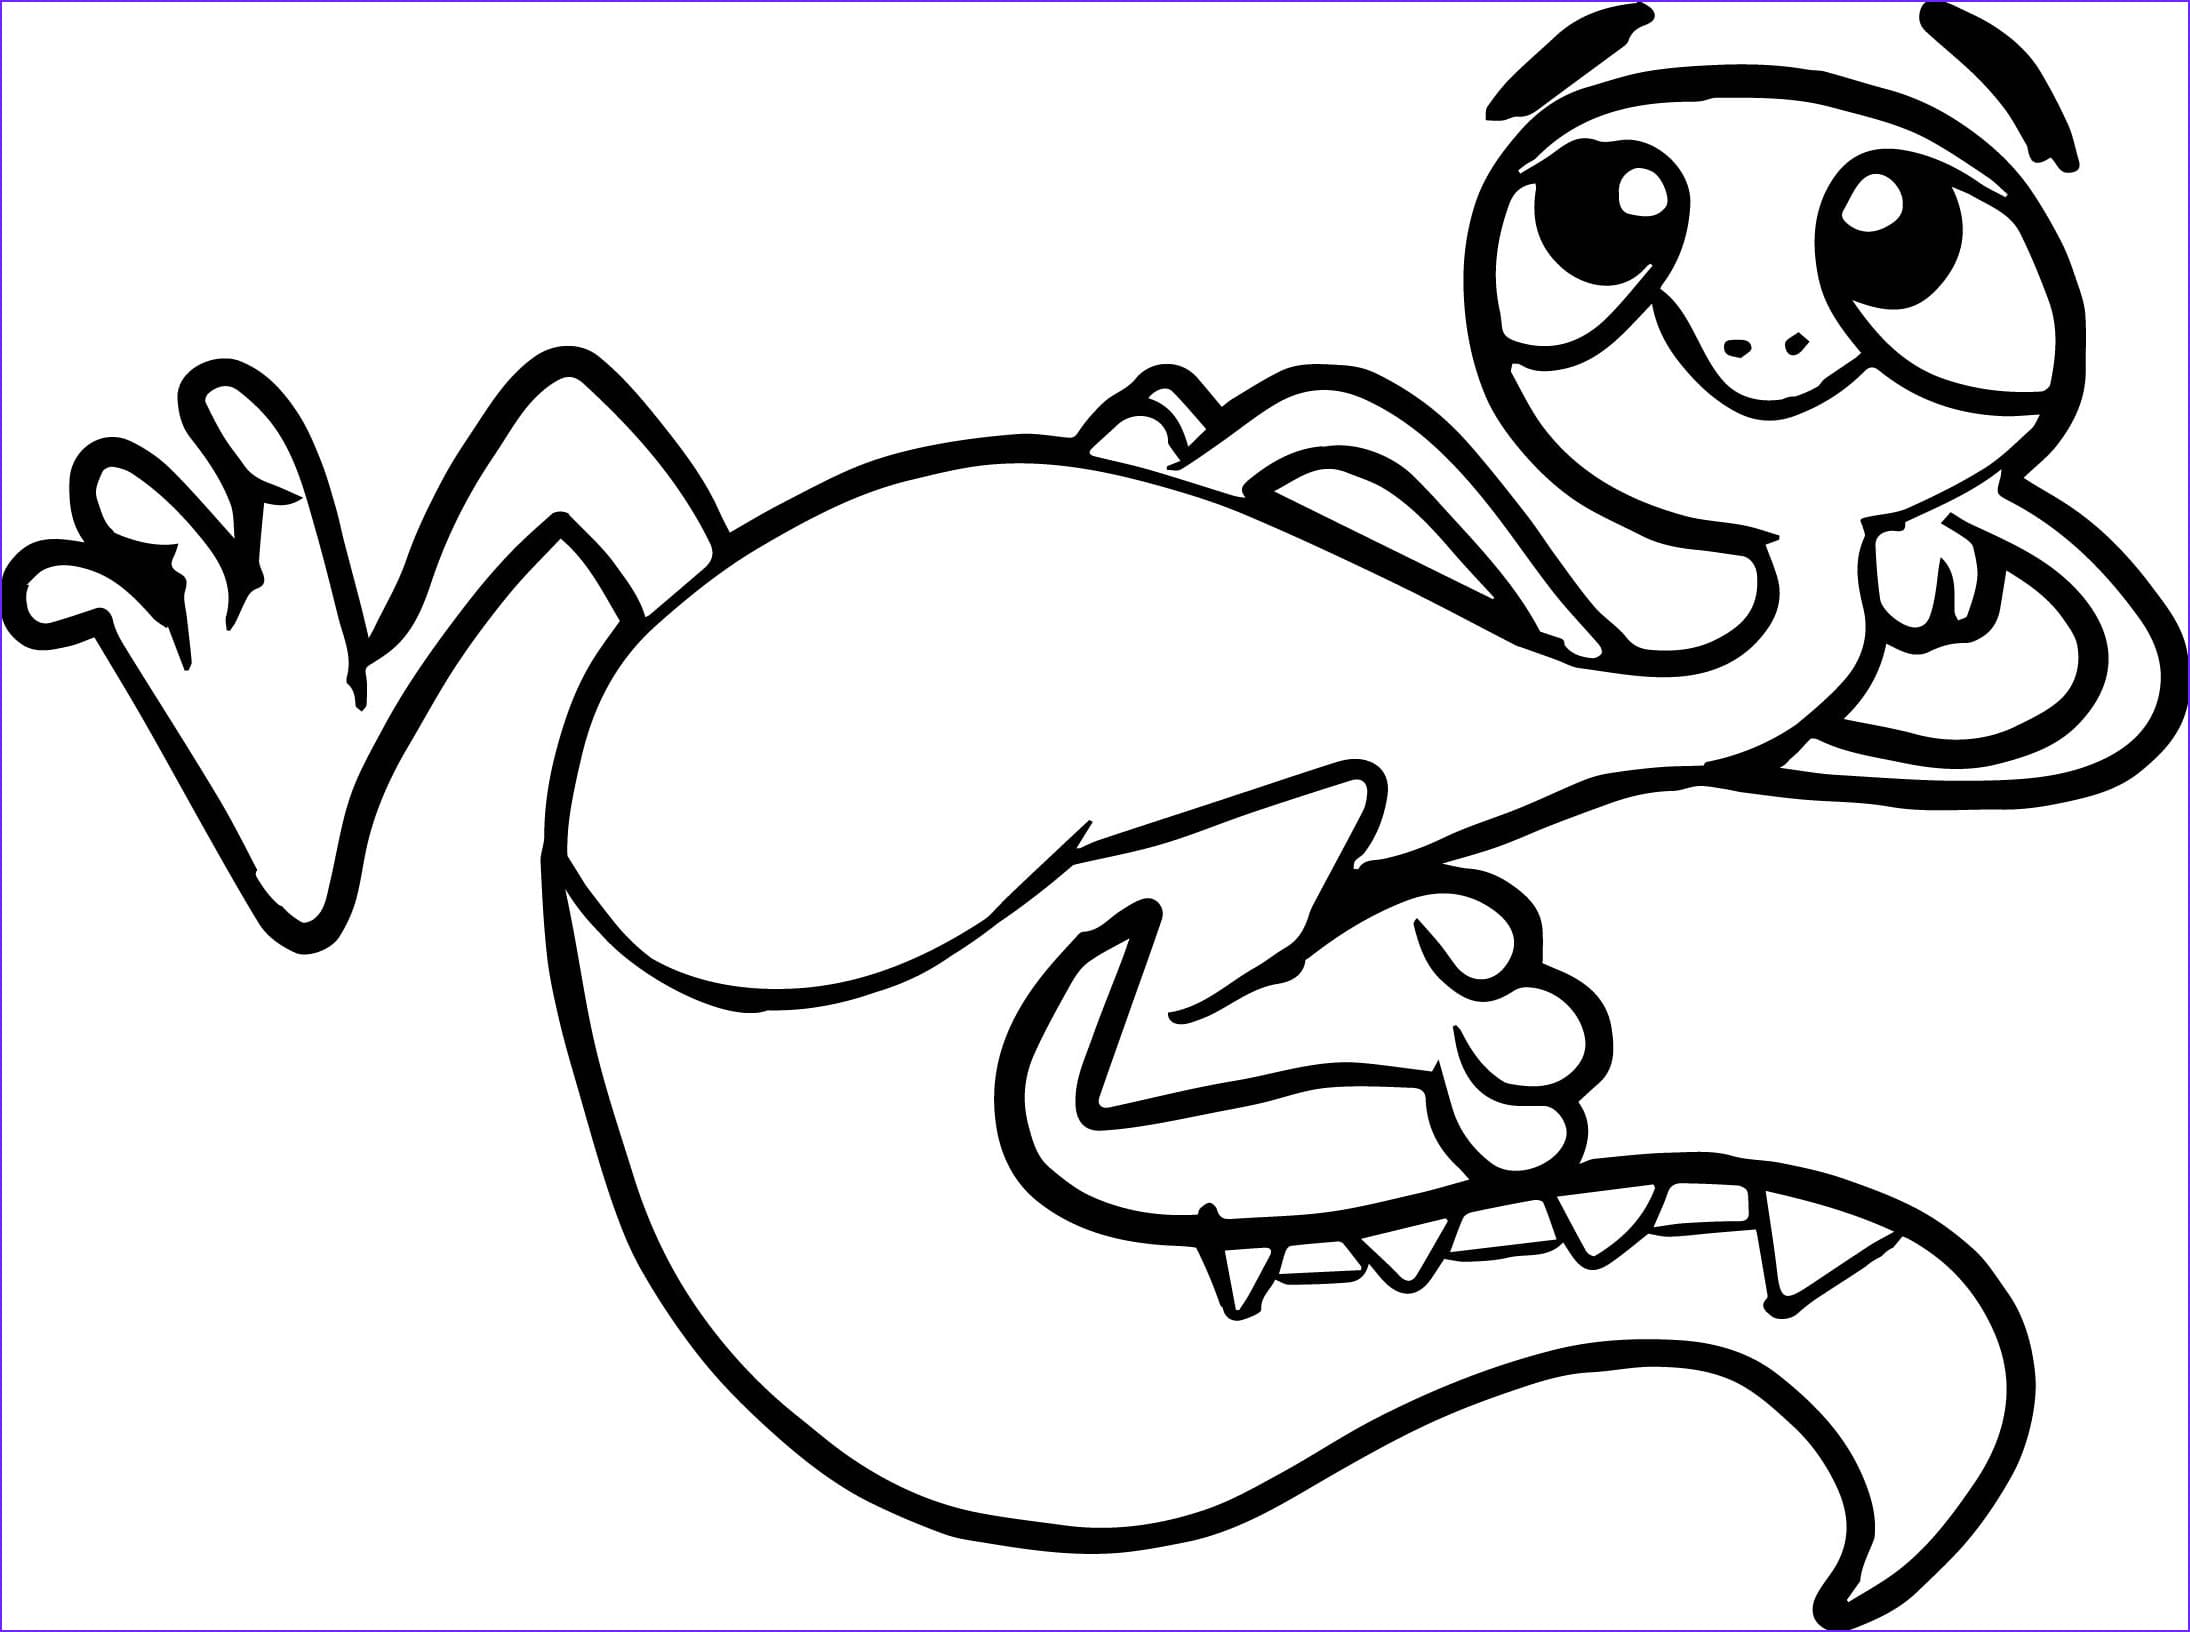 Nature In Gecko Coloring Coloring Page